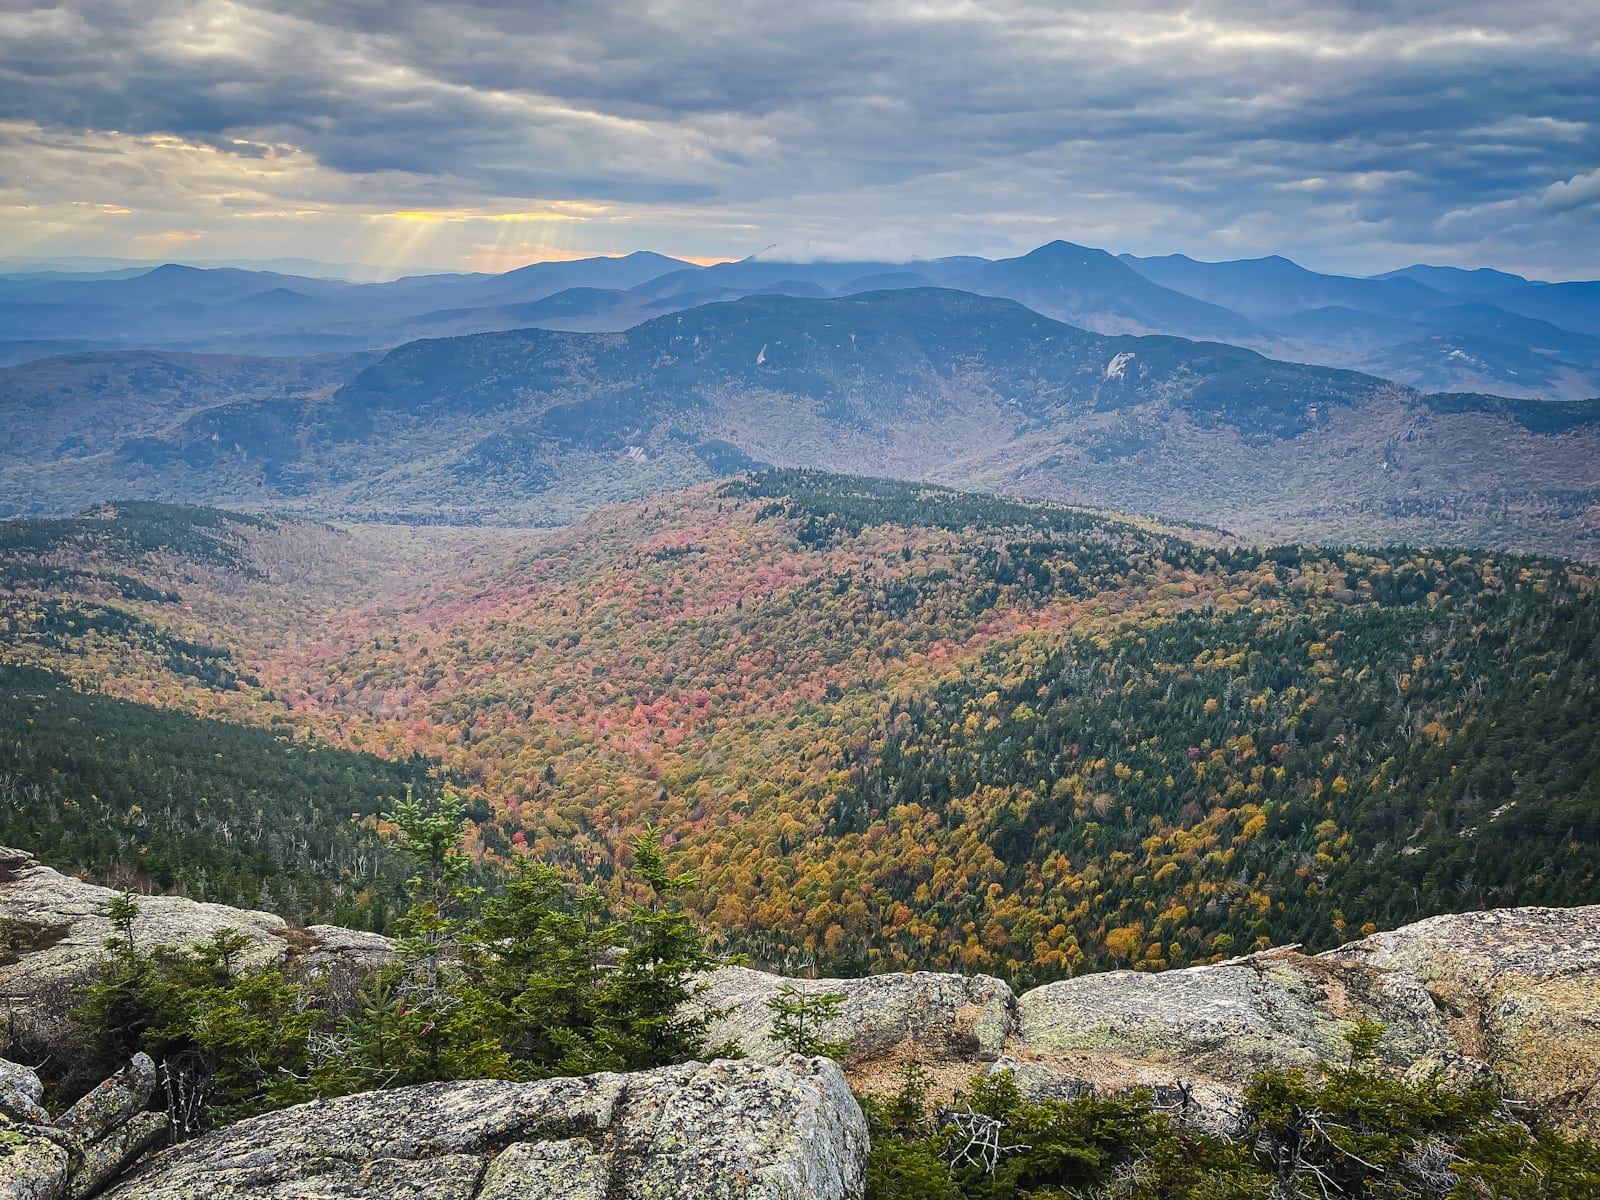 Fall Foliage seeing from Mount Chocorua in New Hampshire, Oct 11